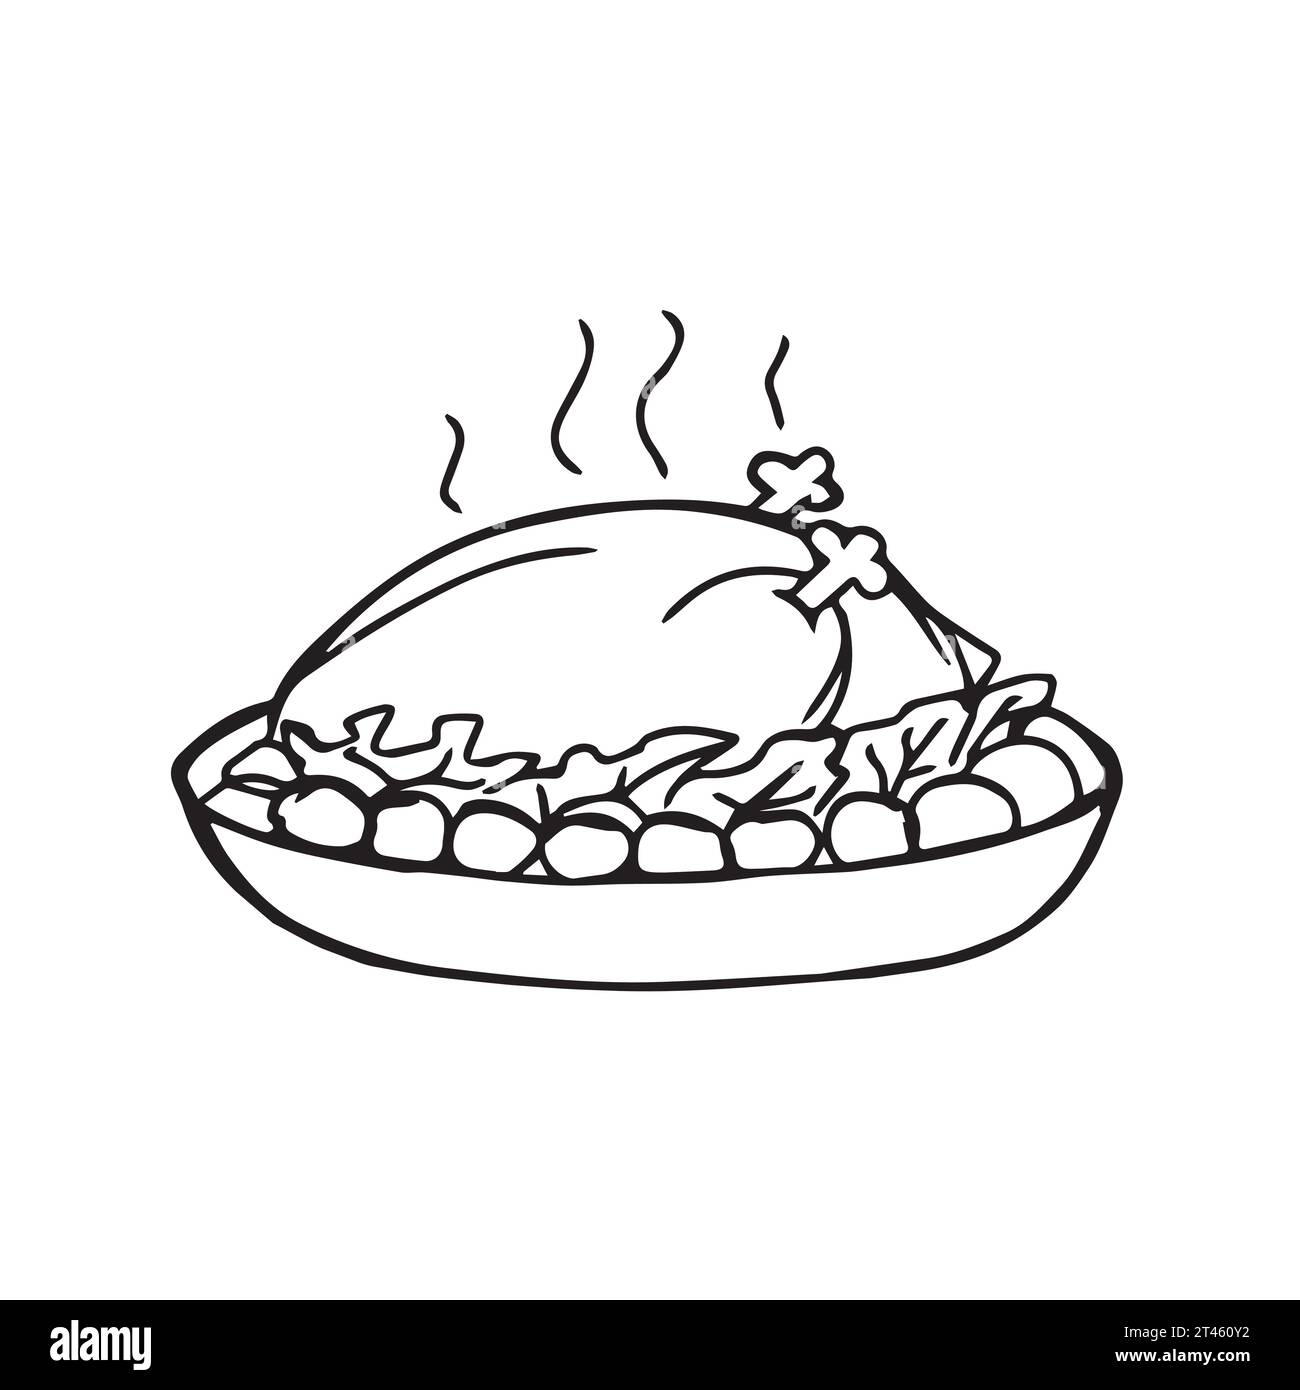 Roasted chicken in a baking dish Stock Vector